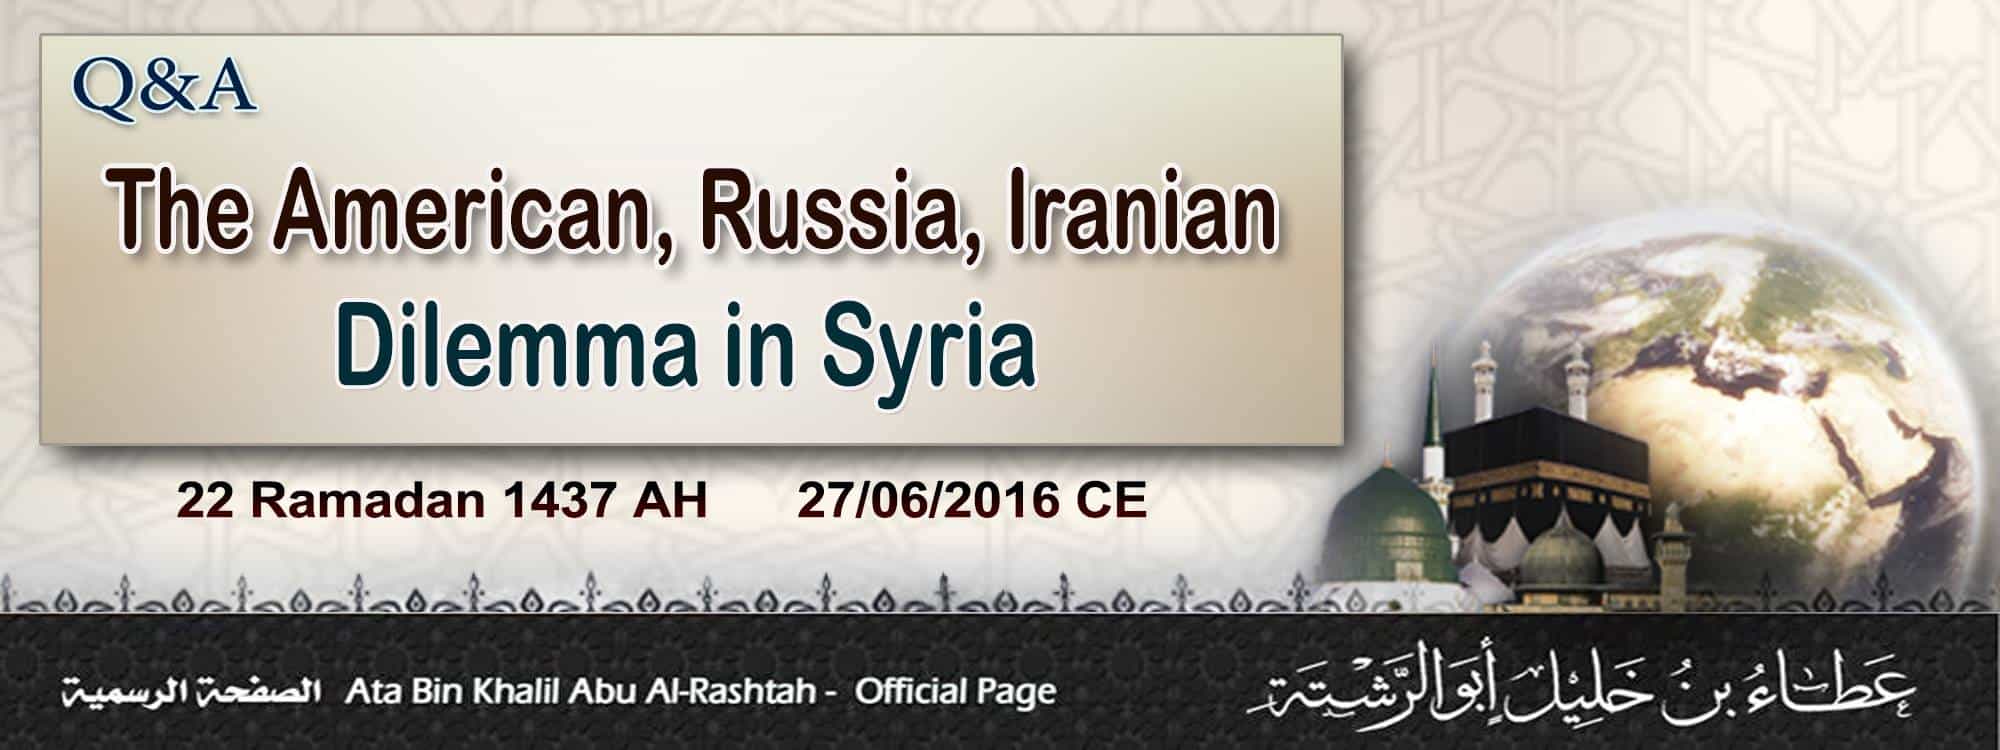 Q&A: The American, Russia, and Iranian Dilemma in Syria